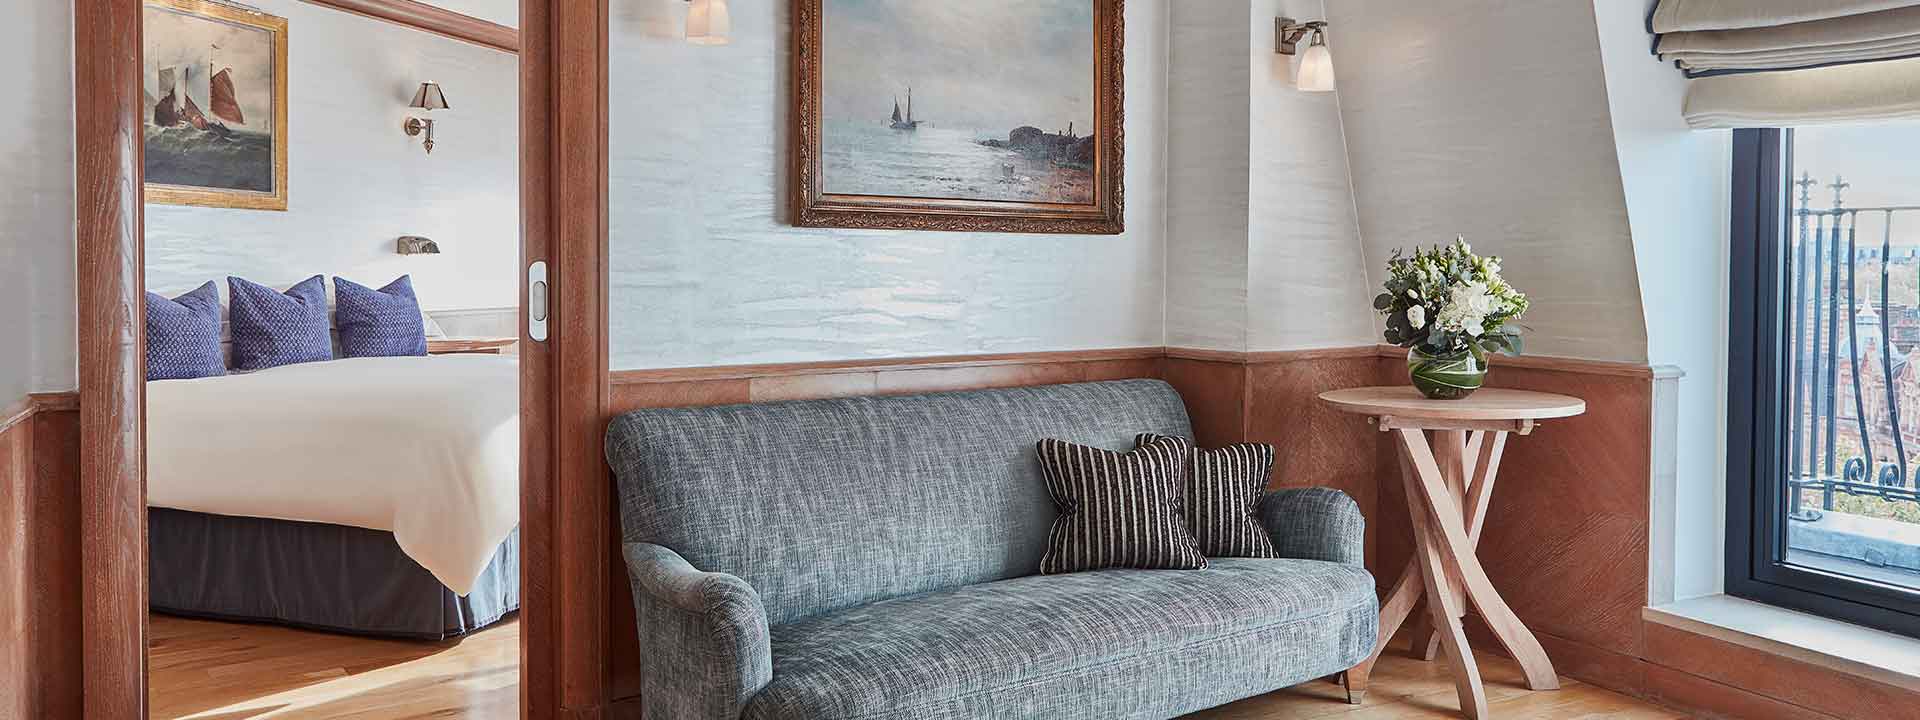 A view of the study room and comfortable sofa in the nautical style interior of The Eagles Lodge, in The Connaught.